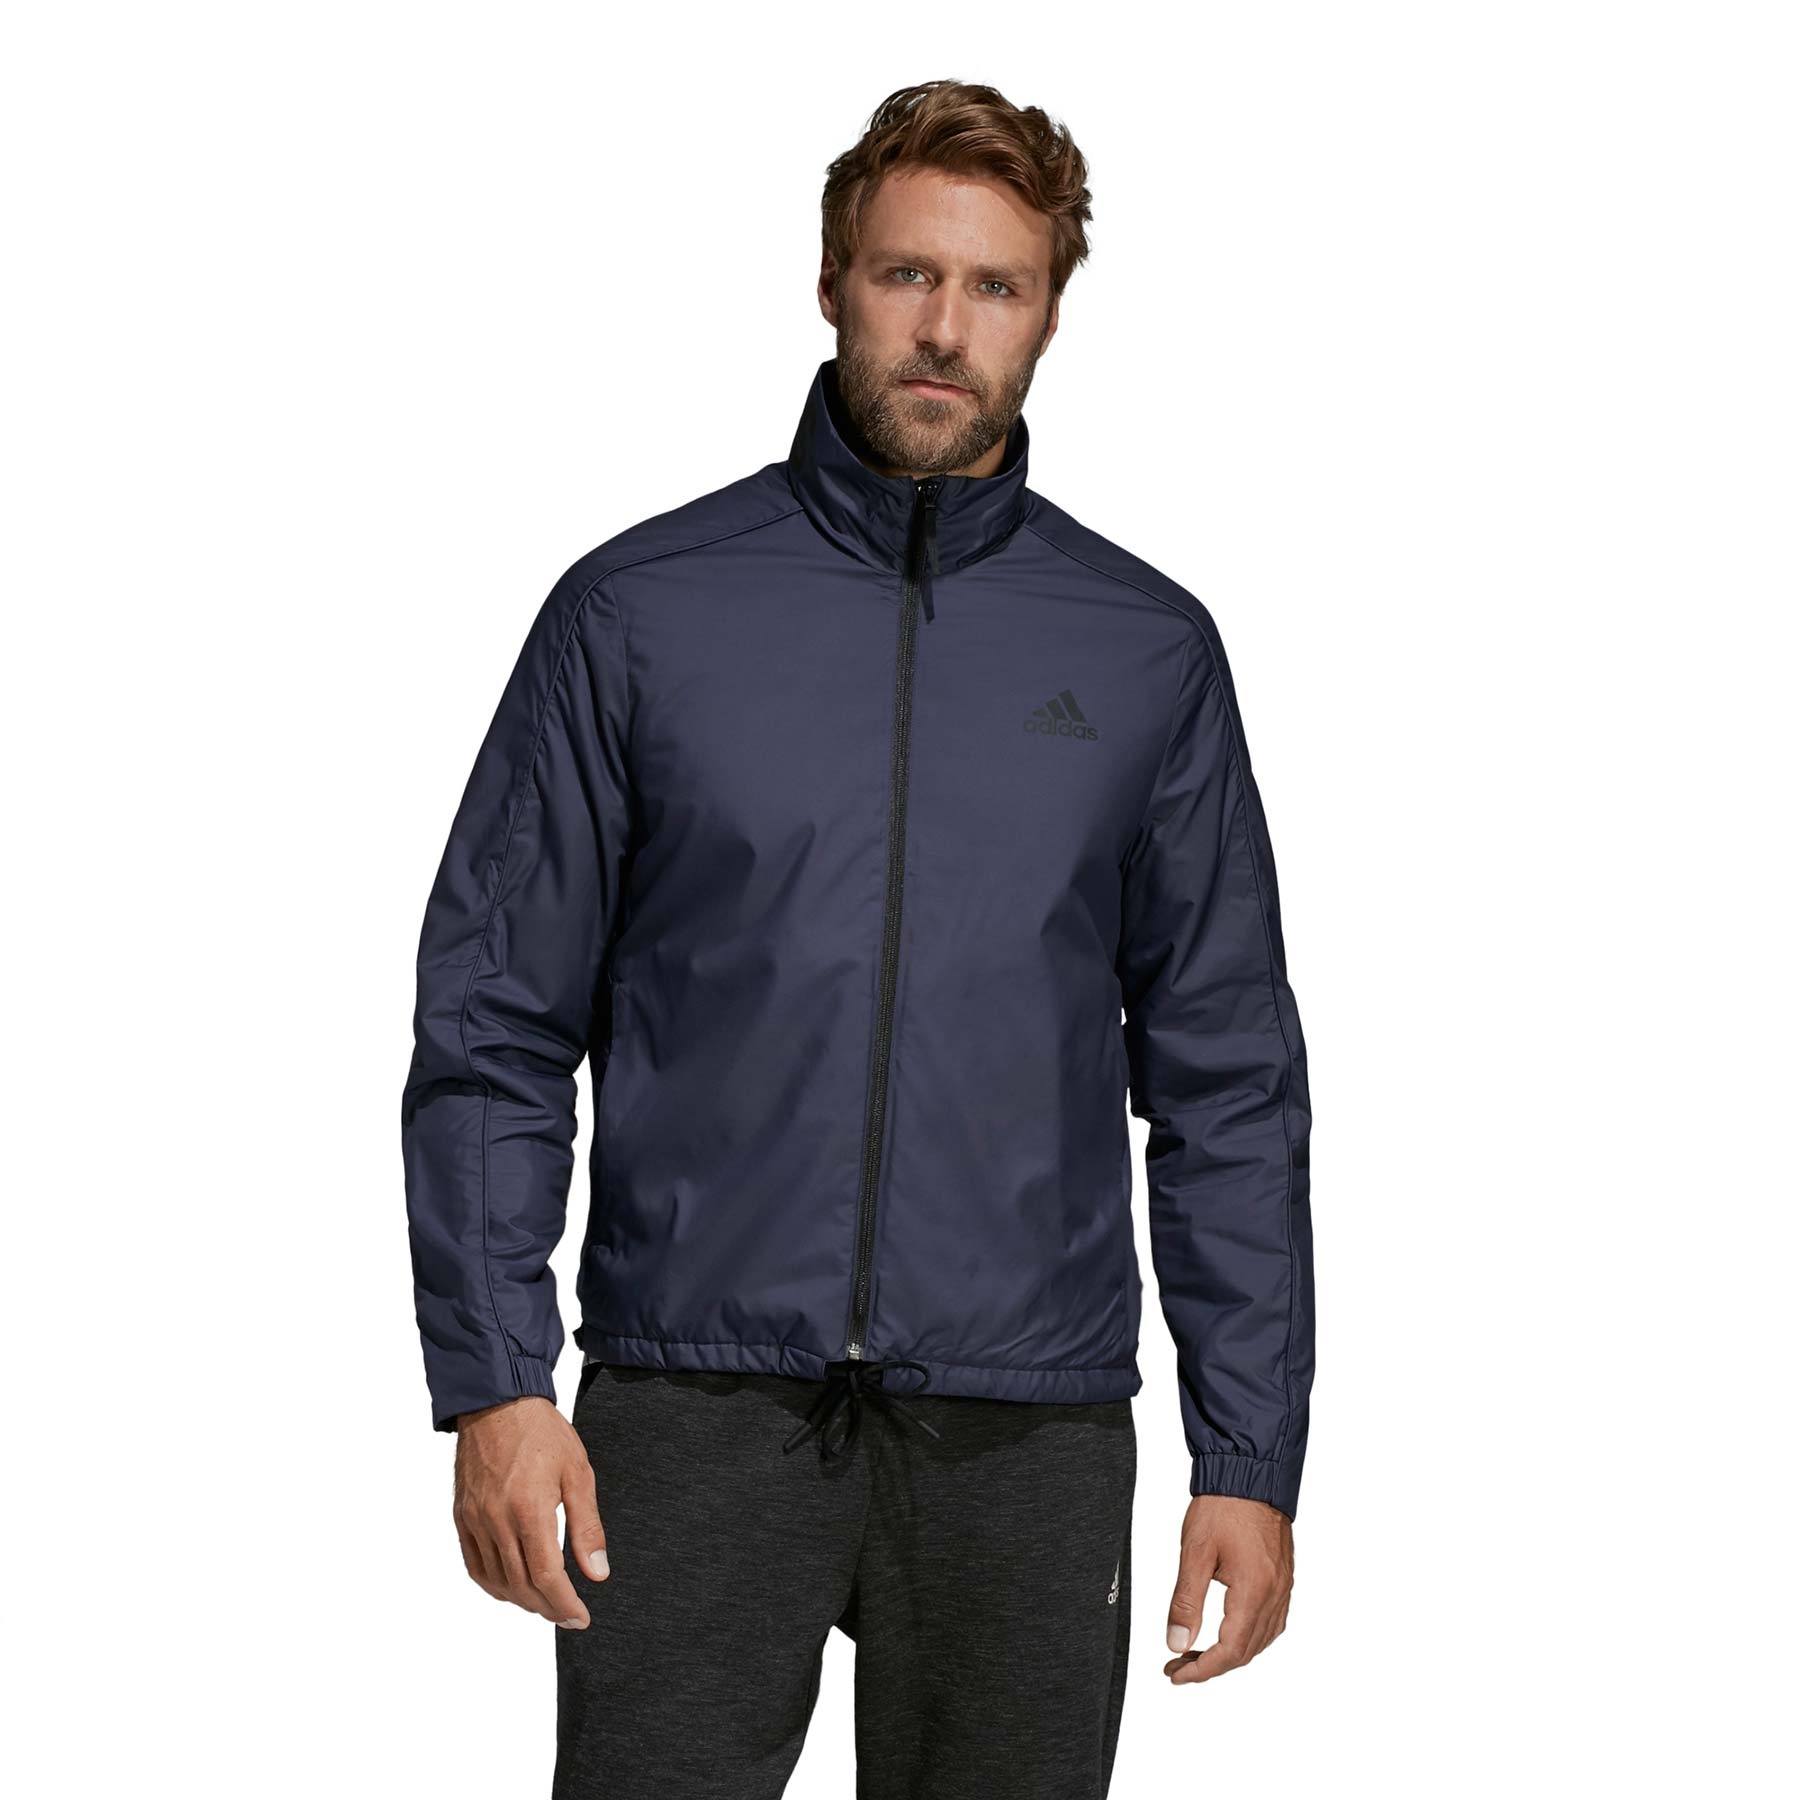 INSULATED JACKET DQ1610